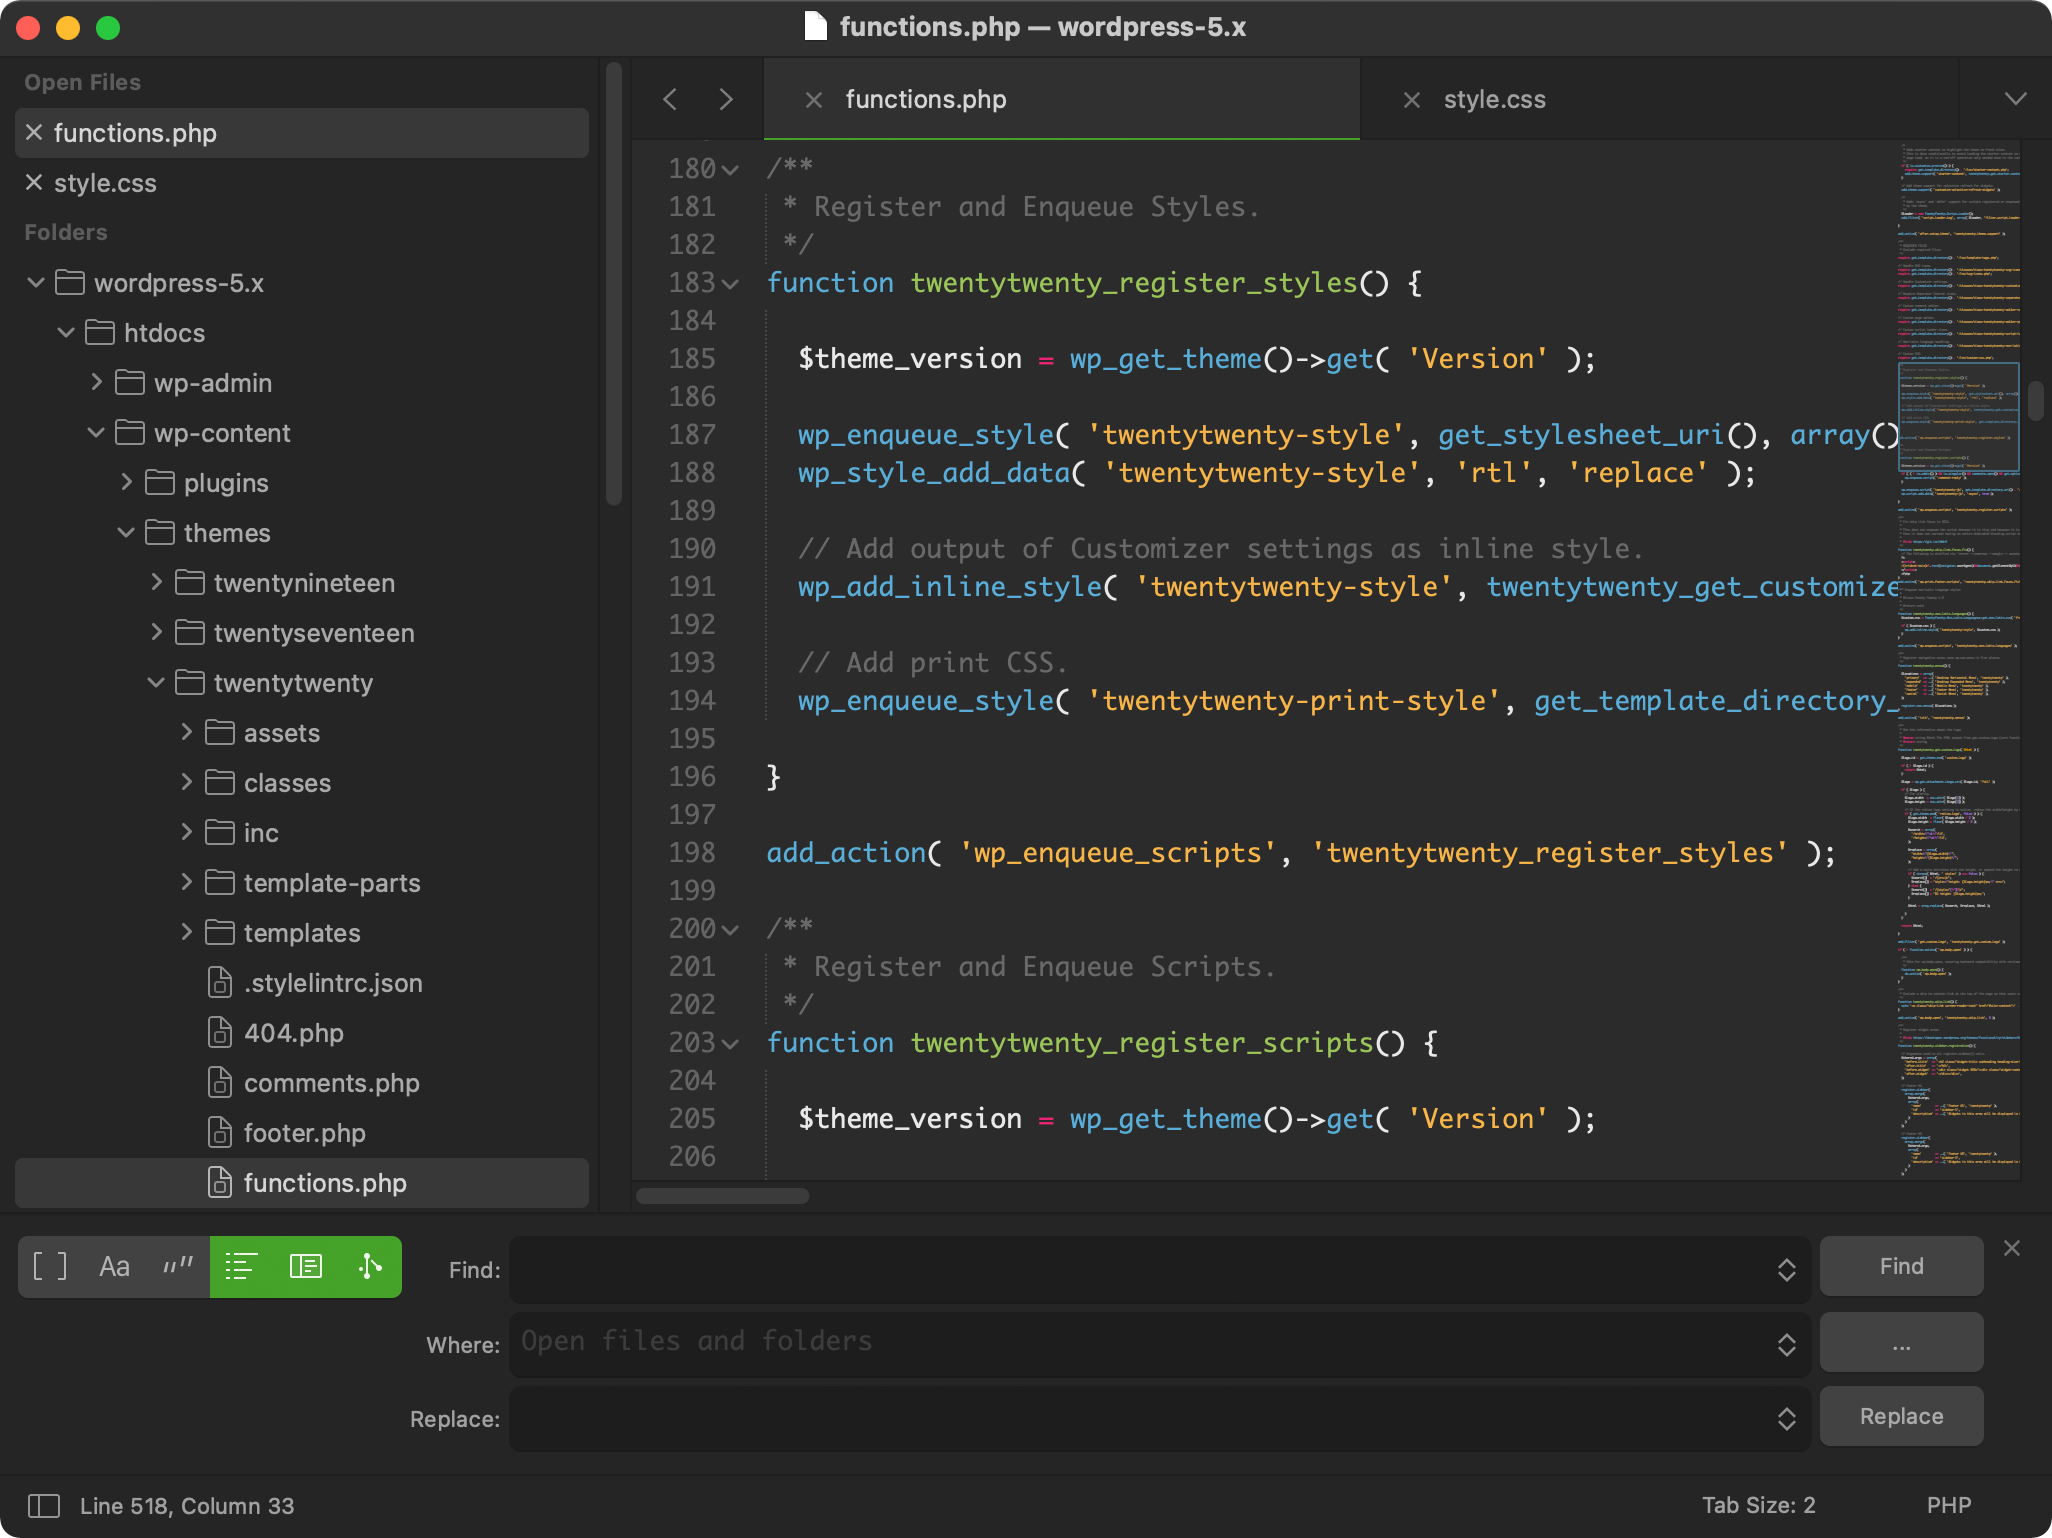 Gravity theme displayed in Sublime Text (screen shot)